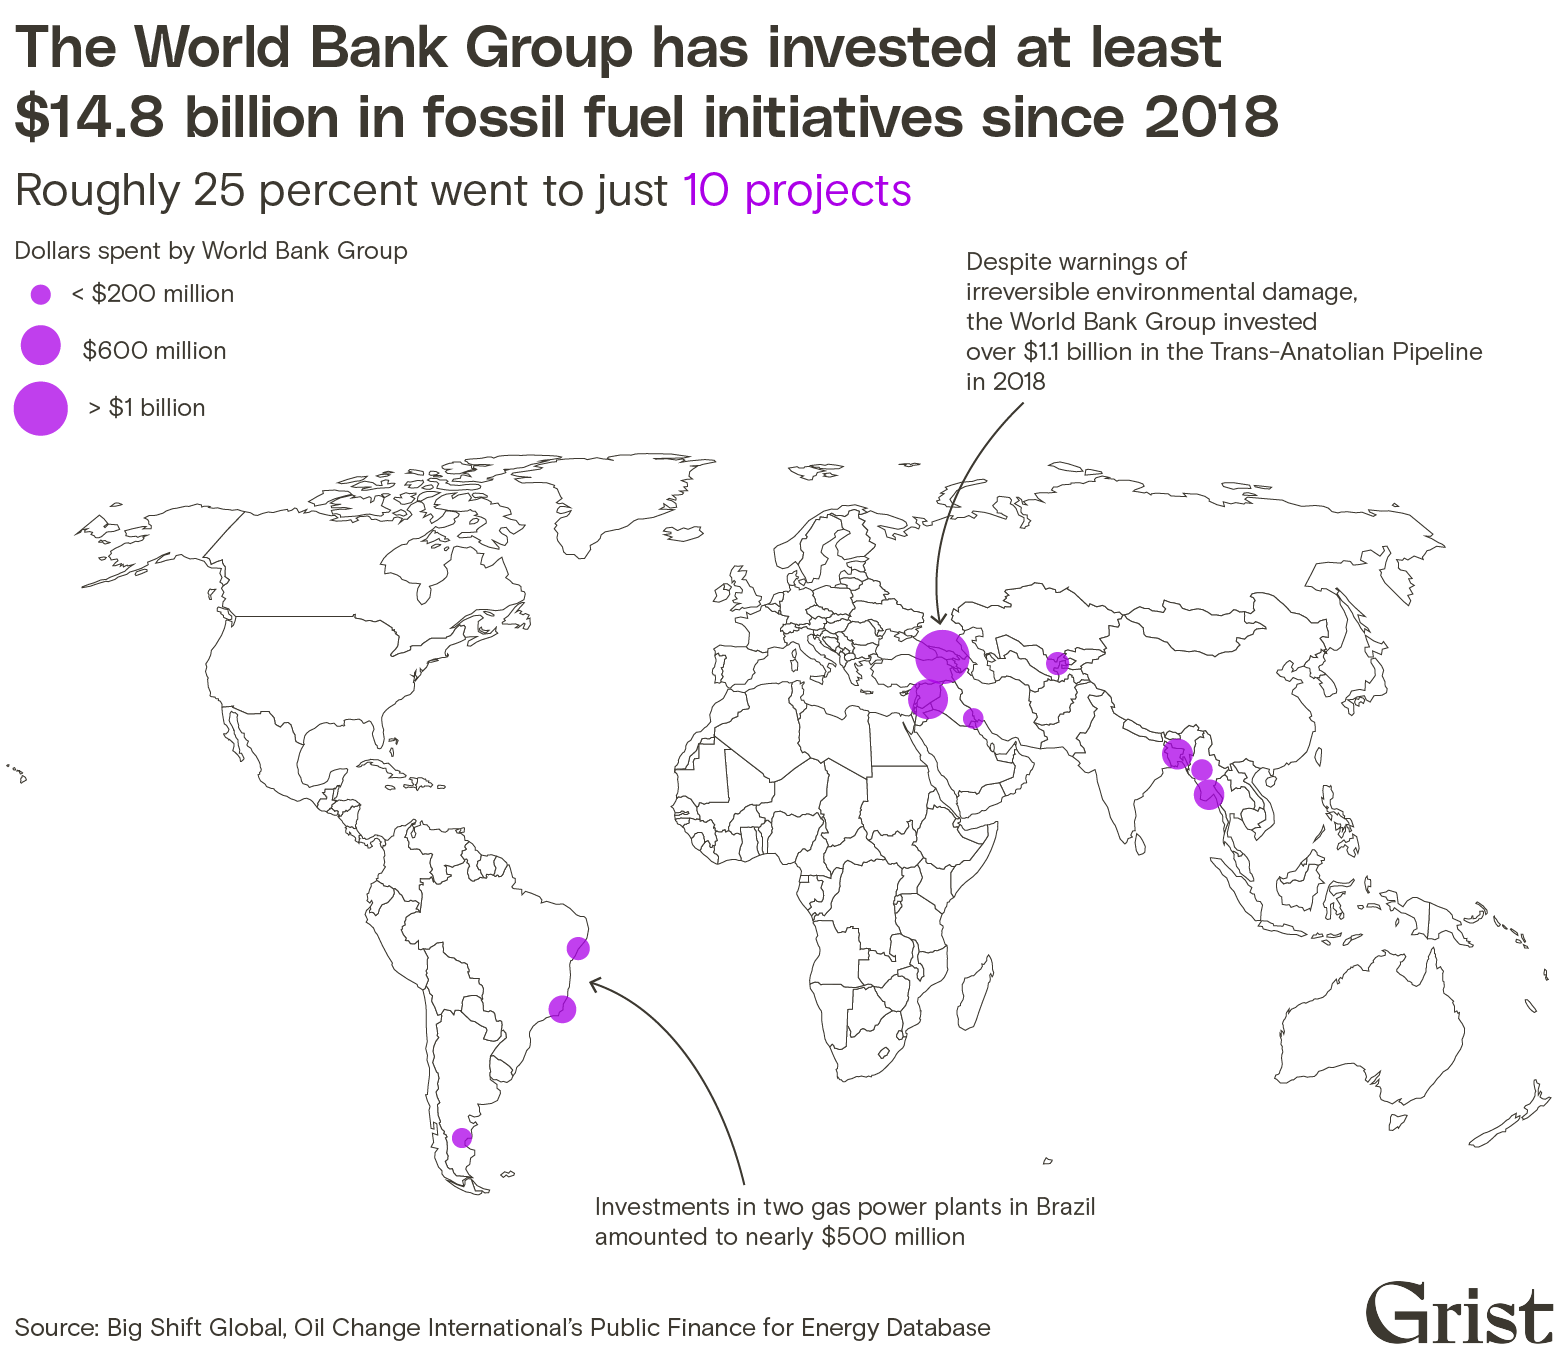 Cylinder stepped map showing the largest investments made by the World Bank Group worldwide between 2018 and 2021.